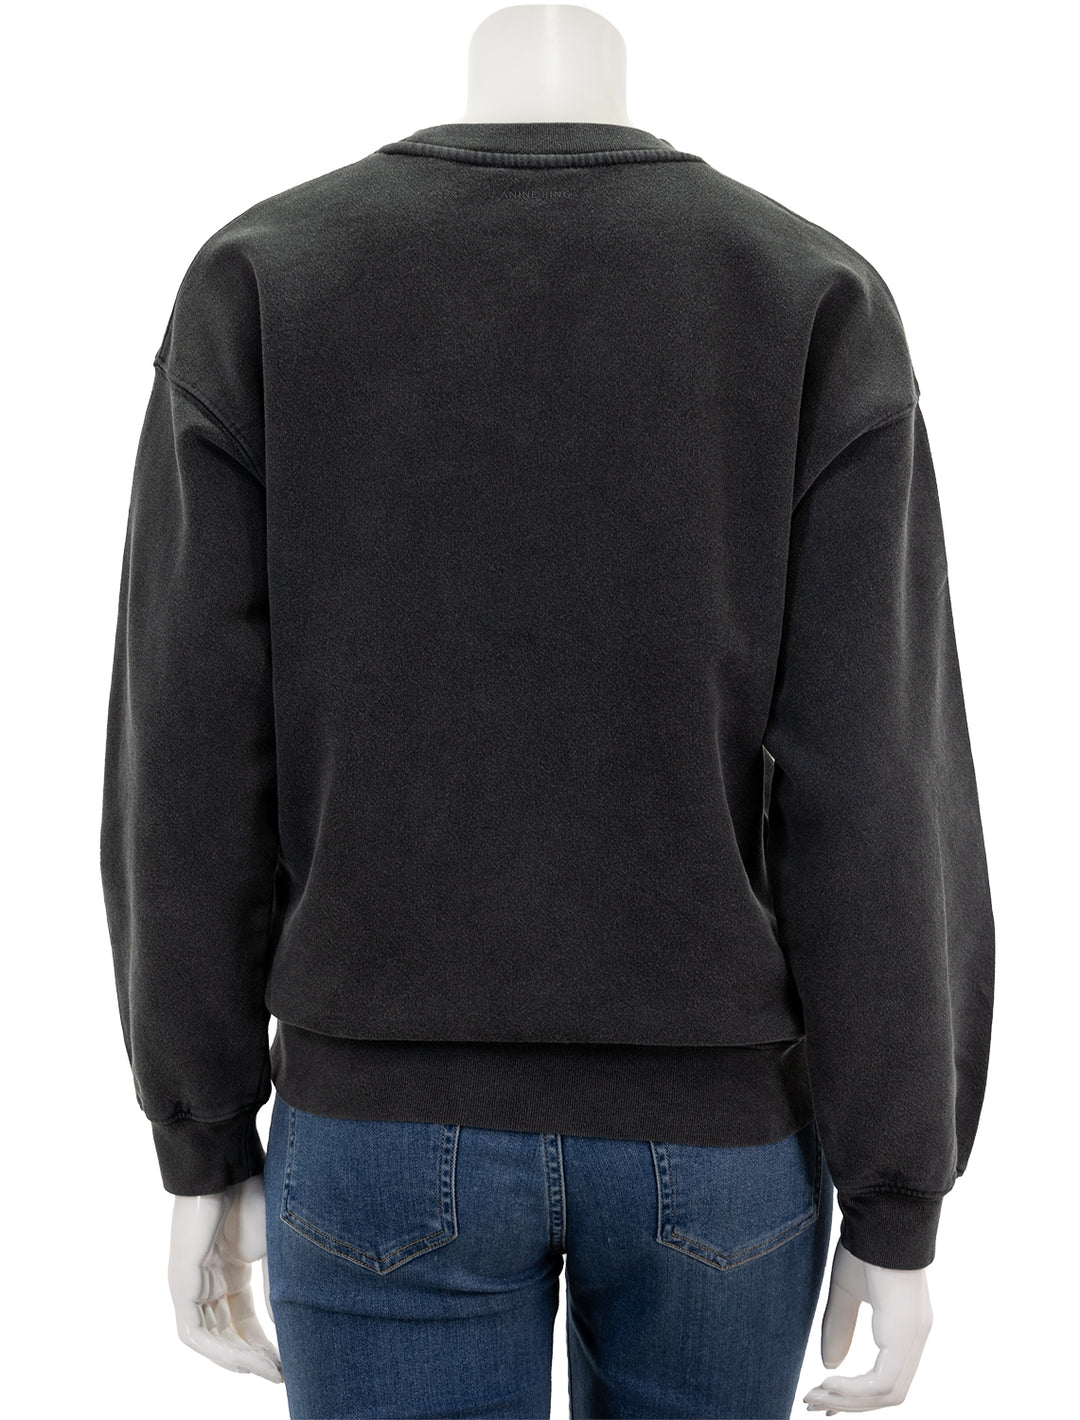 Back view of Anine Bing's spotted leopard spencer sweatshirt in washed black.